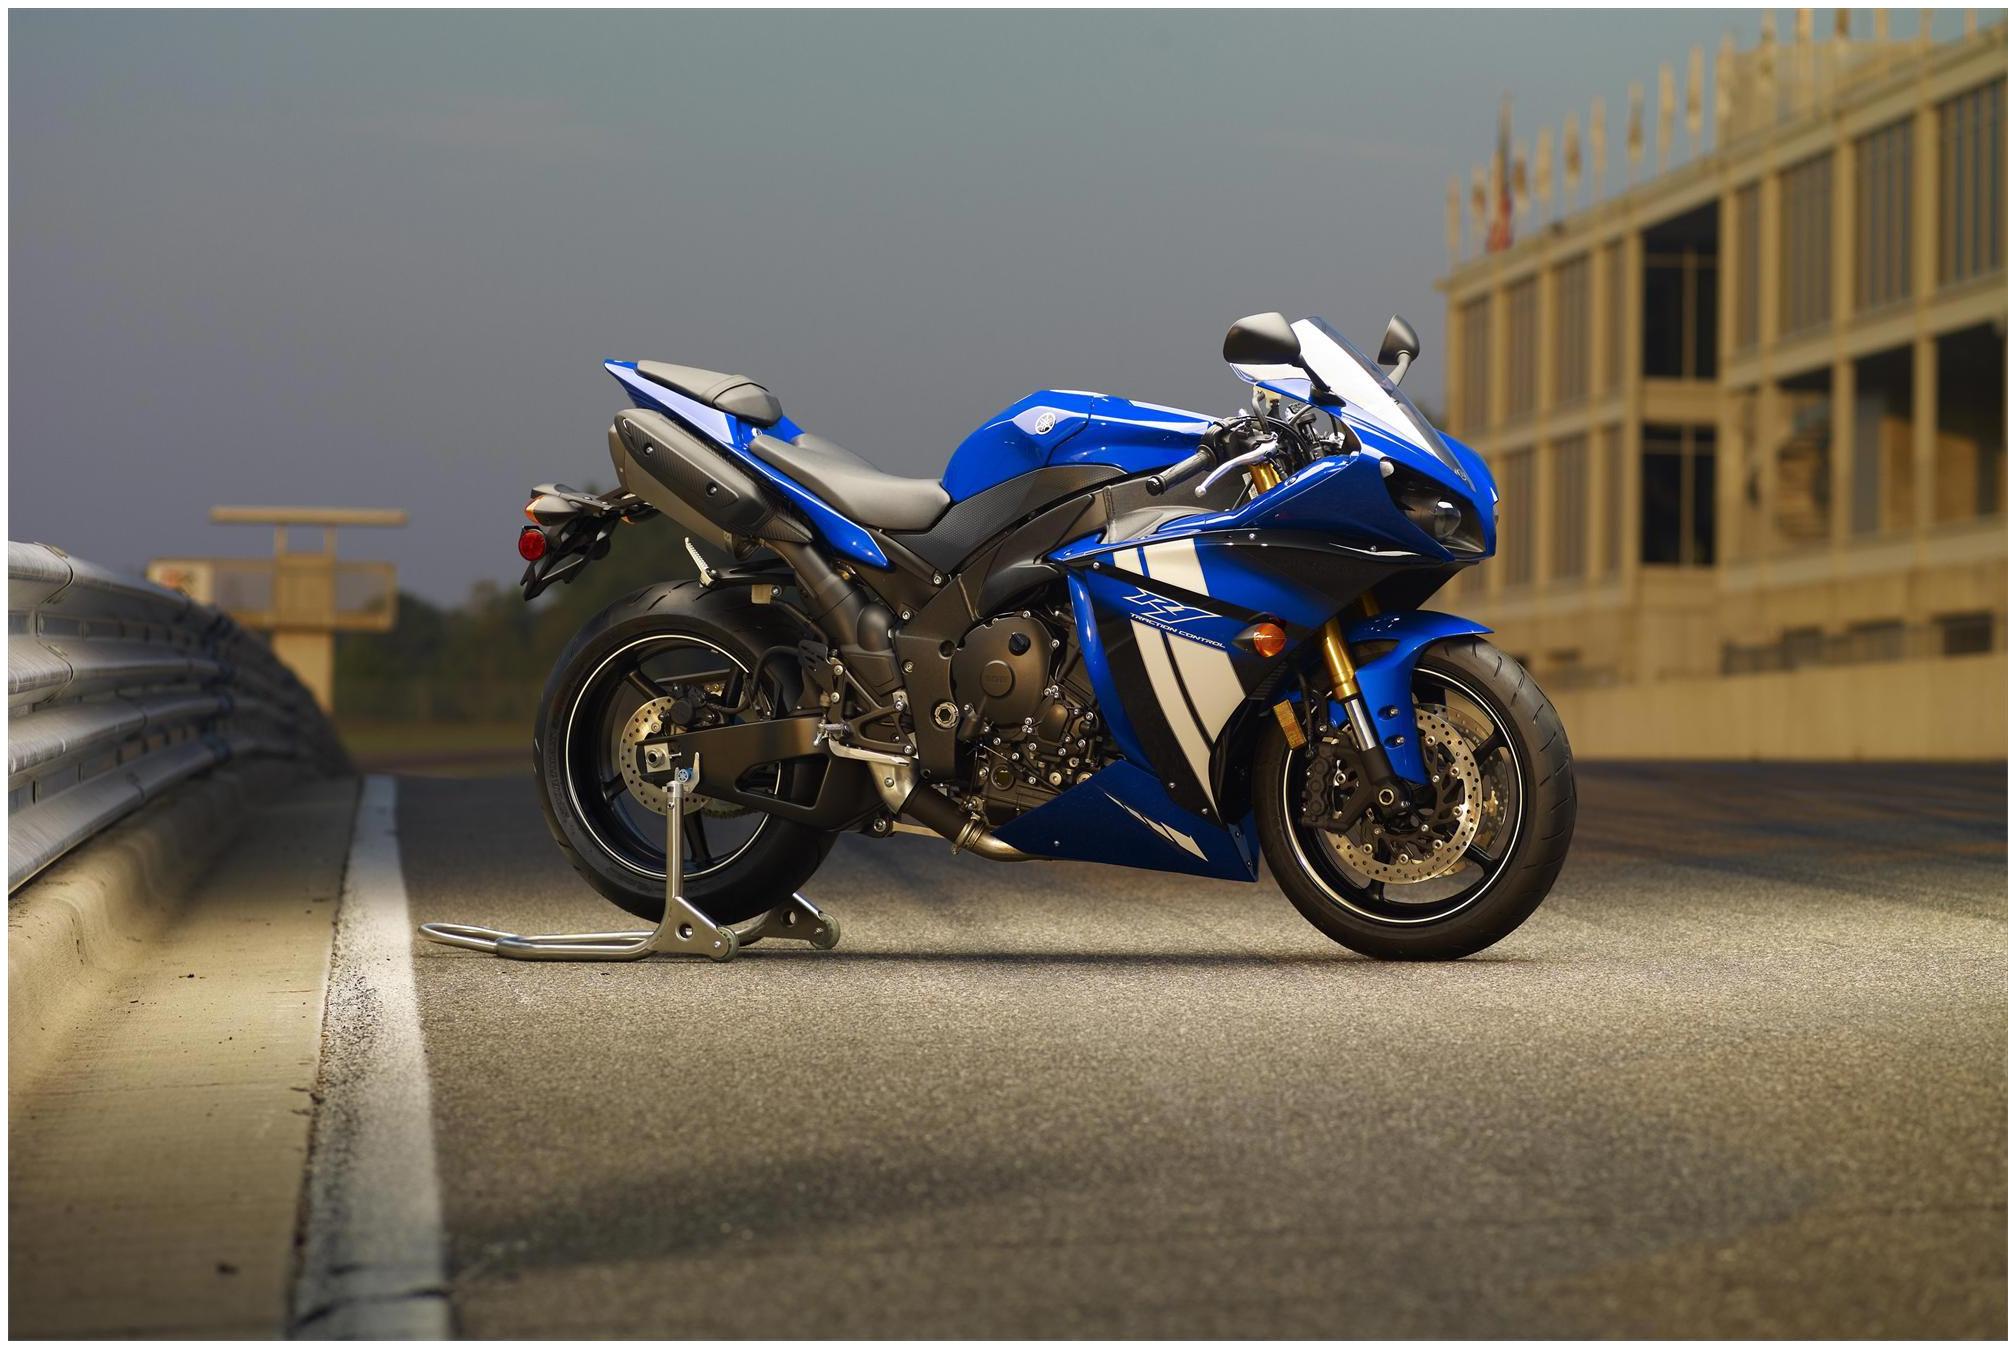 HD Yamaha Wallpaper & Background Image For Download